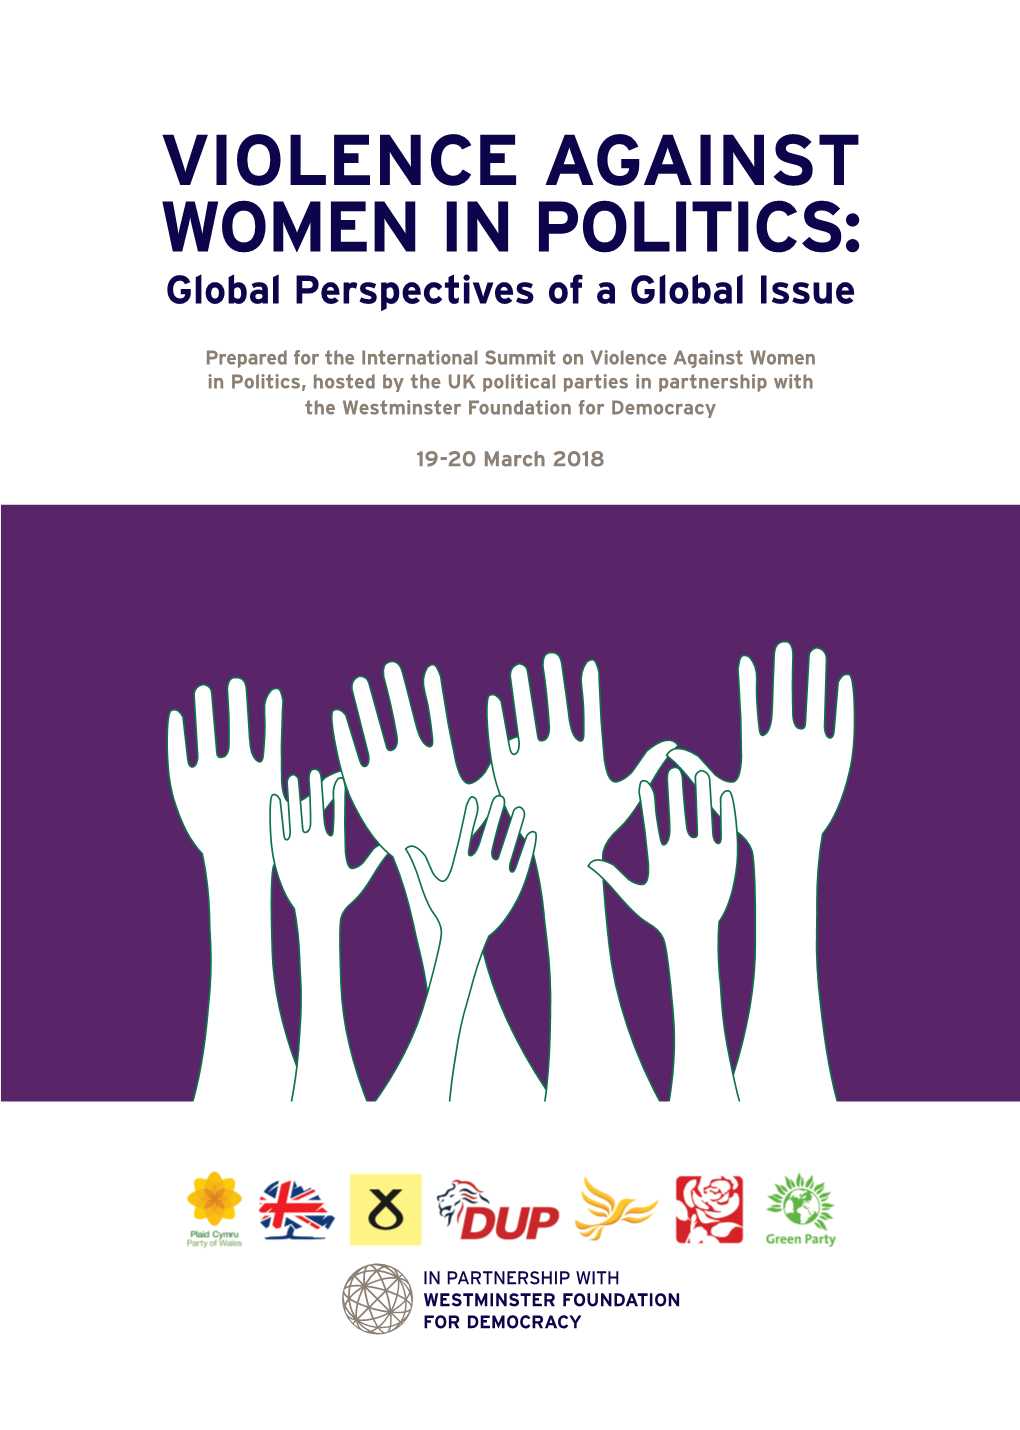 VIOLENCE AGAINST WOMEN in POLITICS: Global Perspectives of a Global Issue